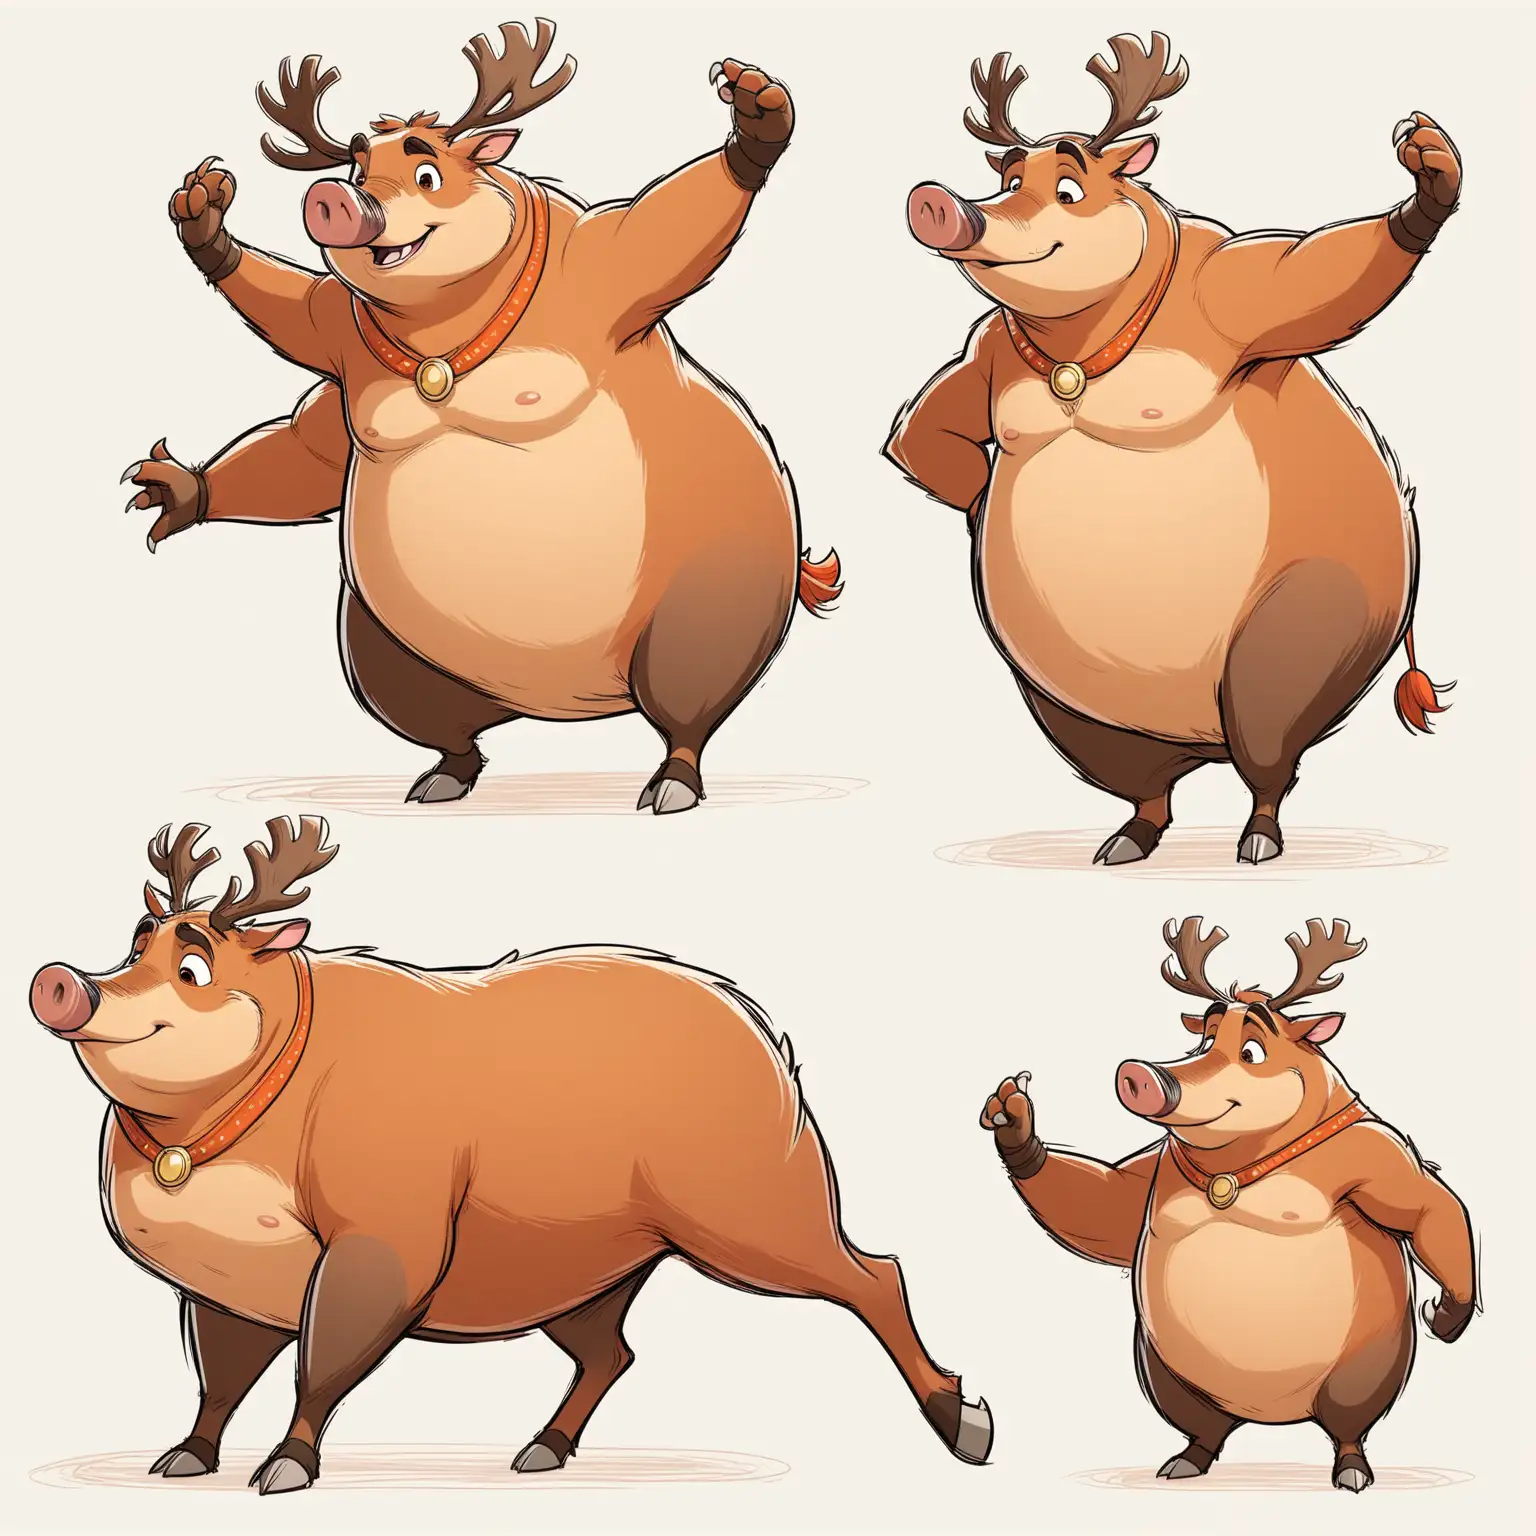  cartoon Anthropomorphic hog in Zootopia Style, concept art, line art, white background, The elk should be standing upright on his hind legs, in a natural human-like pose, with his front legs/hooves at his sides. He should have a confident, alert expression on his face, The hog should have the general body shape and feature,